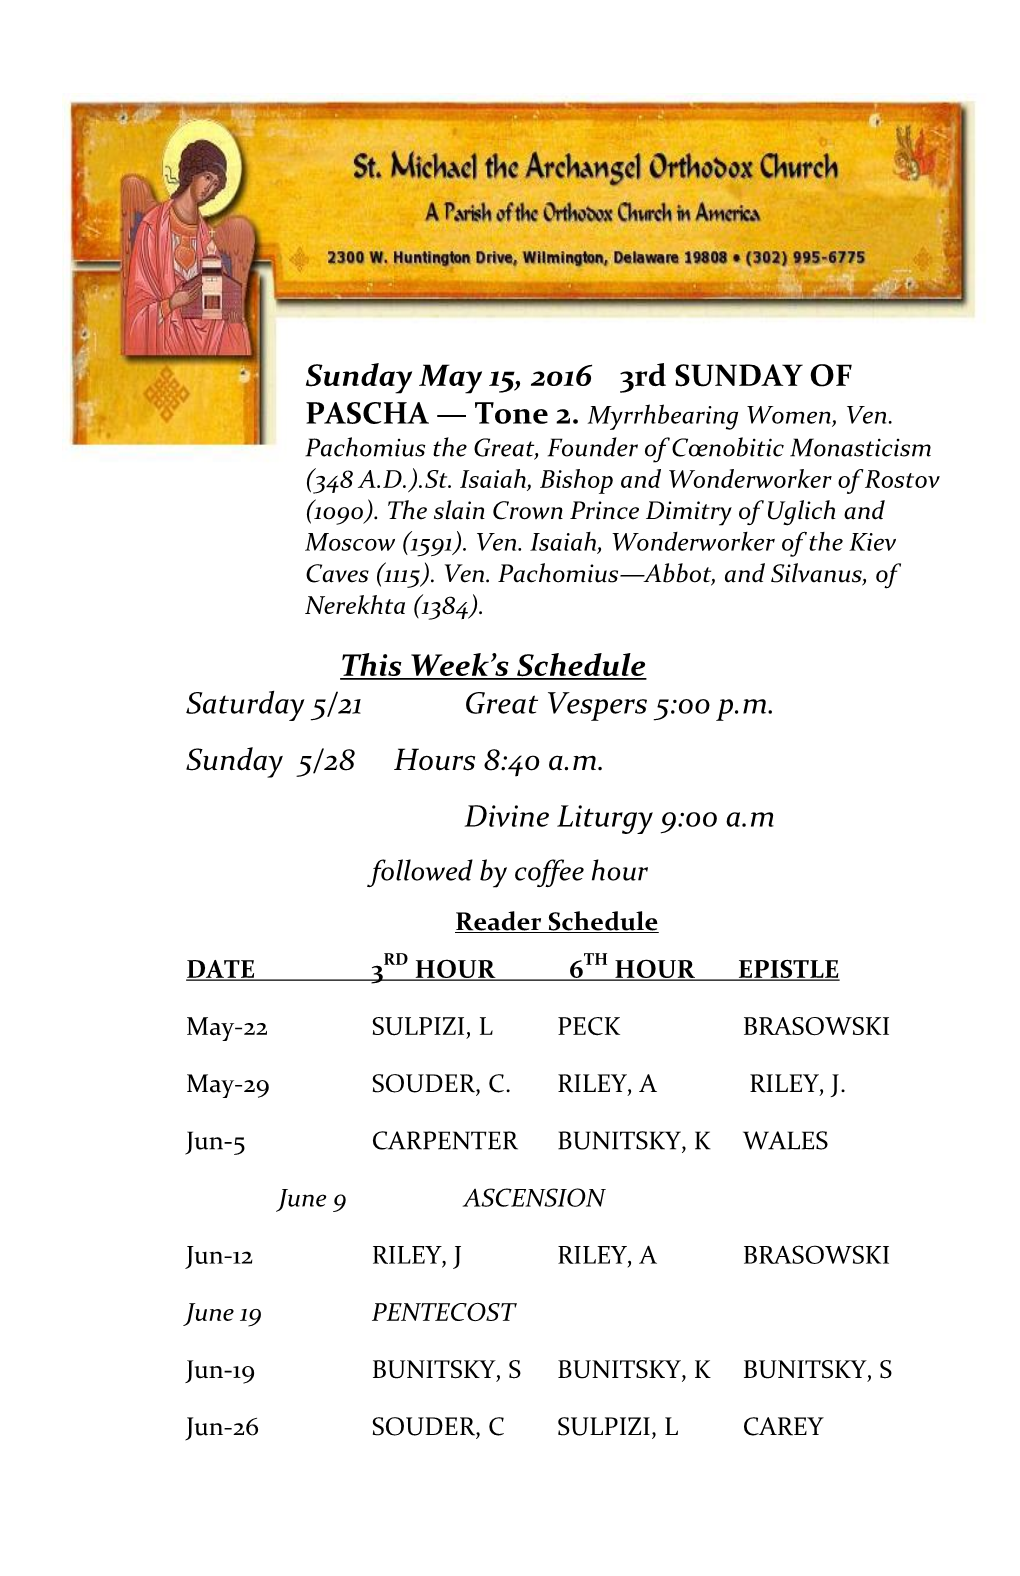 This Week's Schedule Saturday 5/21 Great Vespers 5:00 P.M. Sunday 5